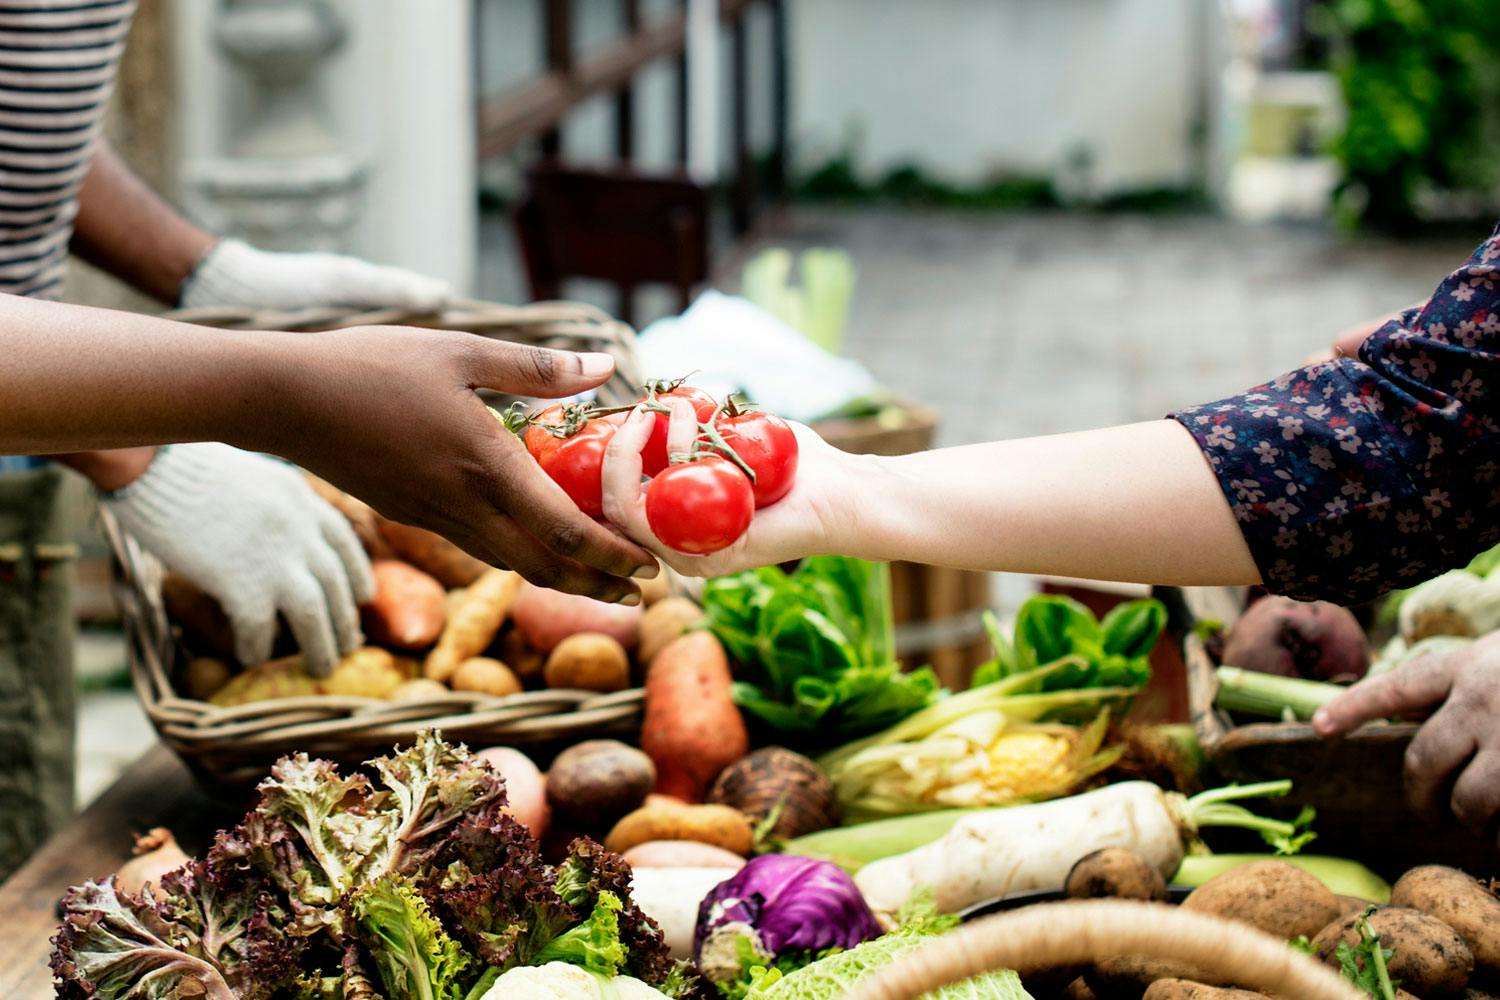 A person hands a bunch of tomatoes to another person at a vegetable stand full of assorted produce.